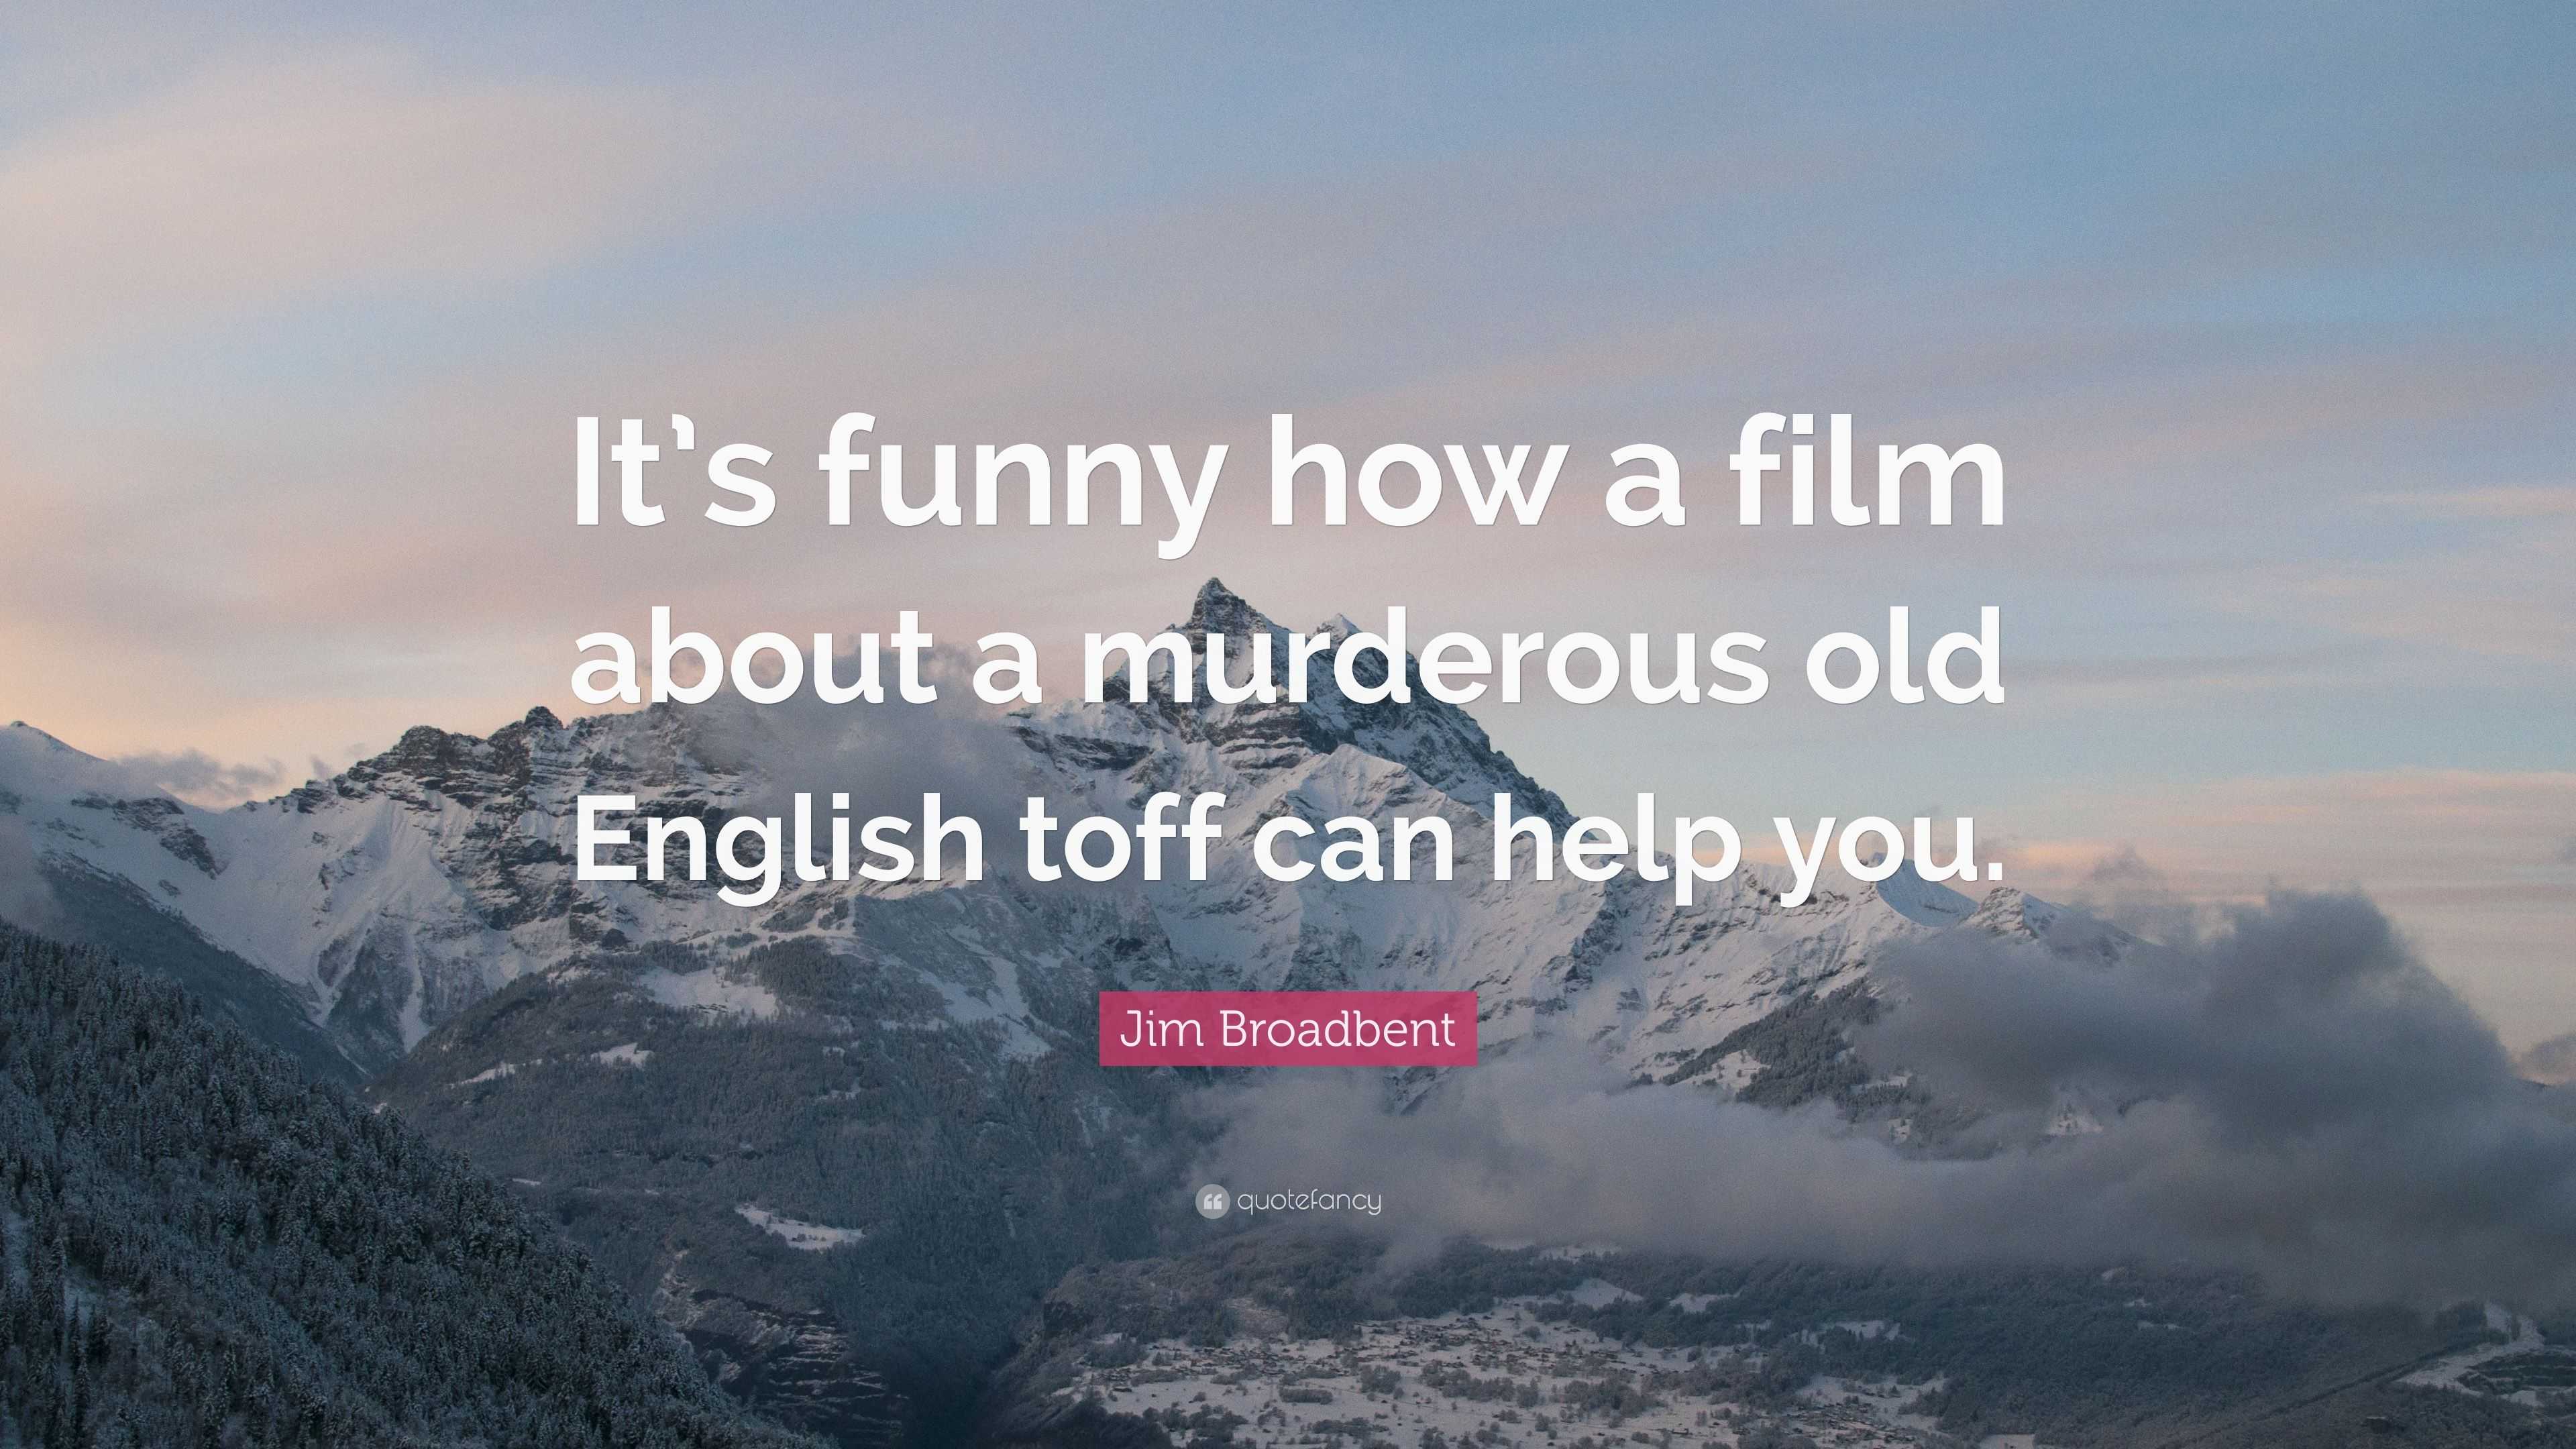 Jim Broadbent Quote: “It's funny how a film about a murderous old English  toff can help